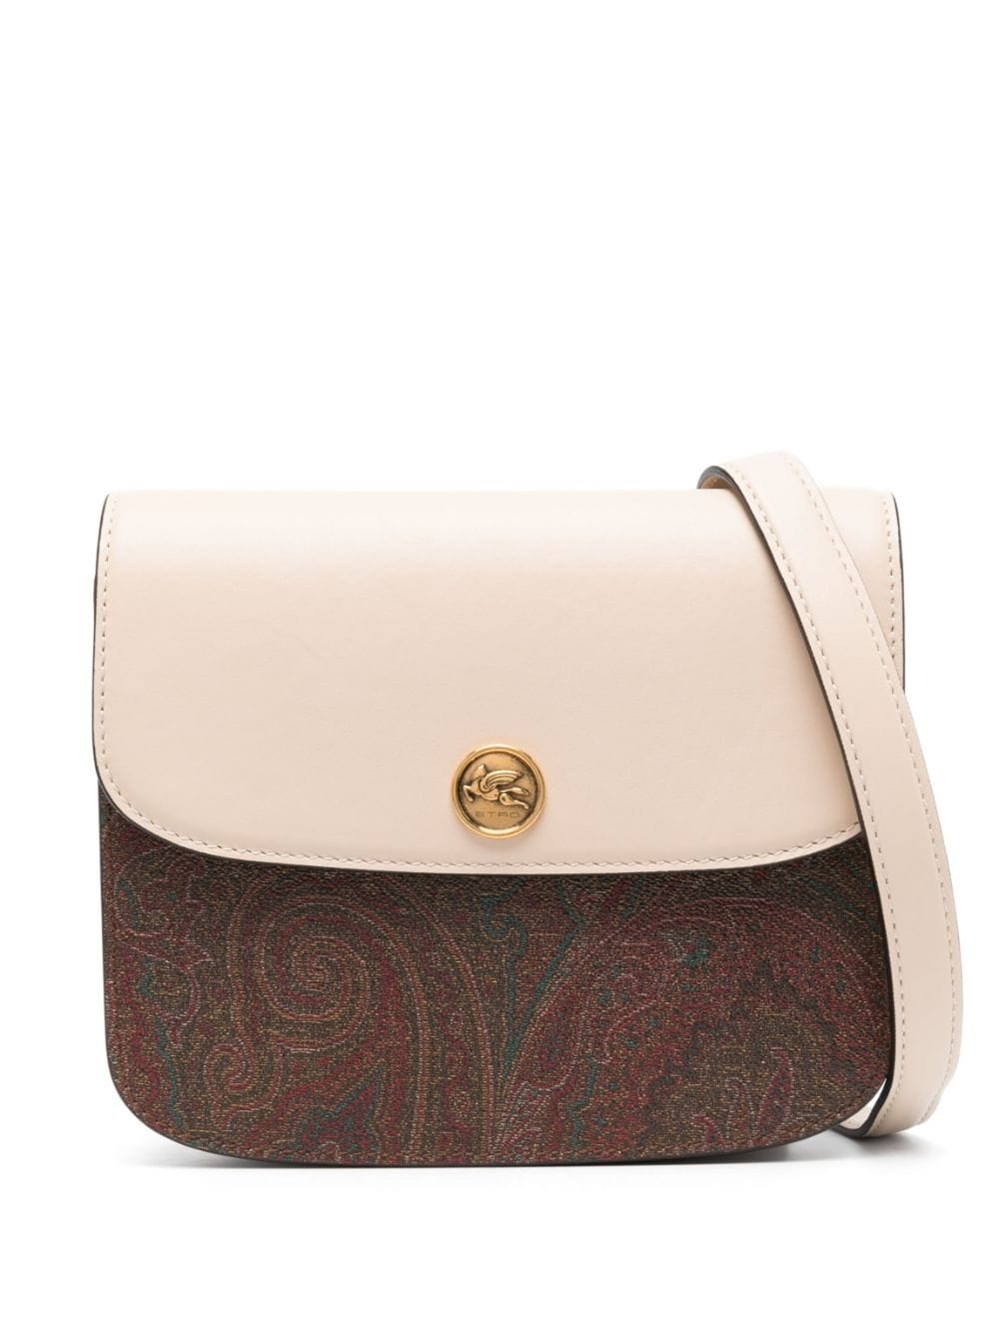 Etro Multicolor Paisley Coated Canvas and Leather Shoulder Bag Etro